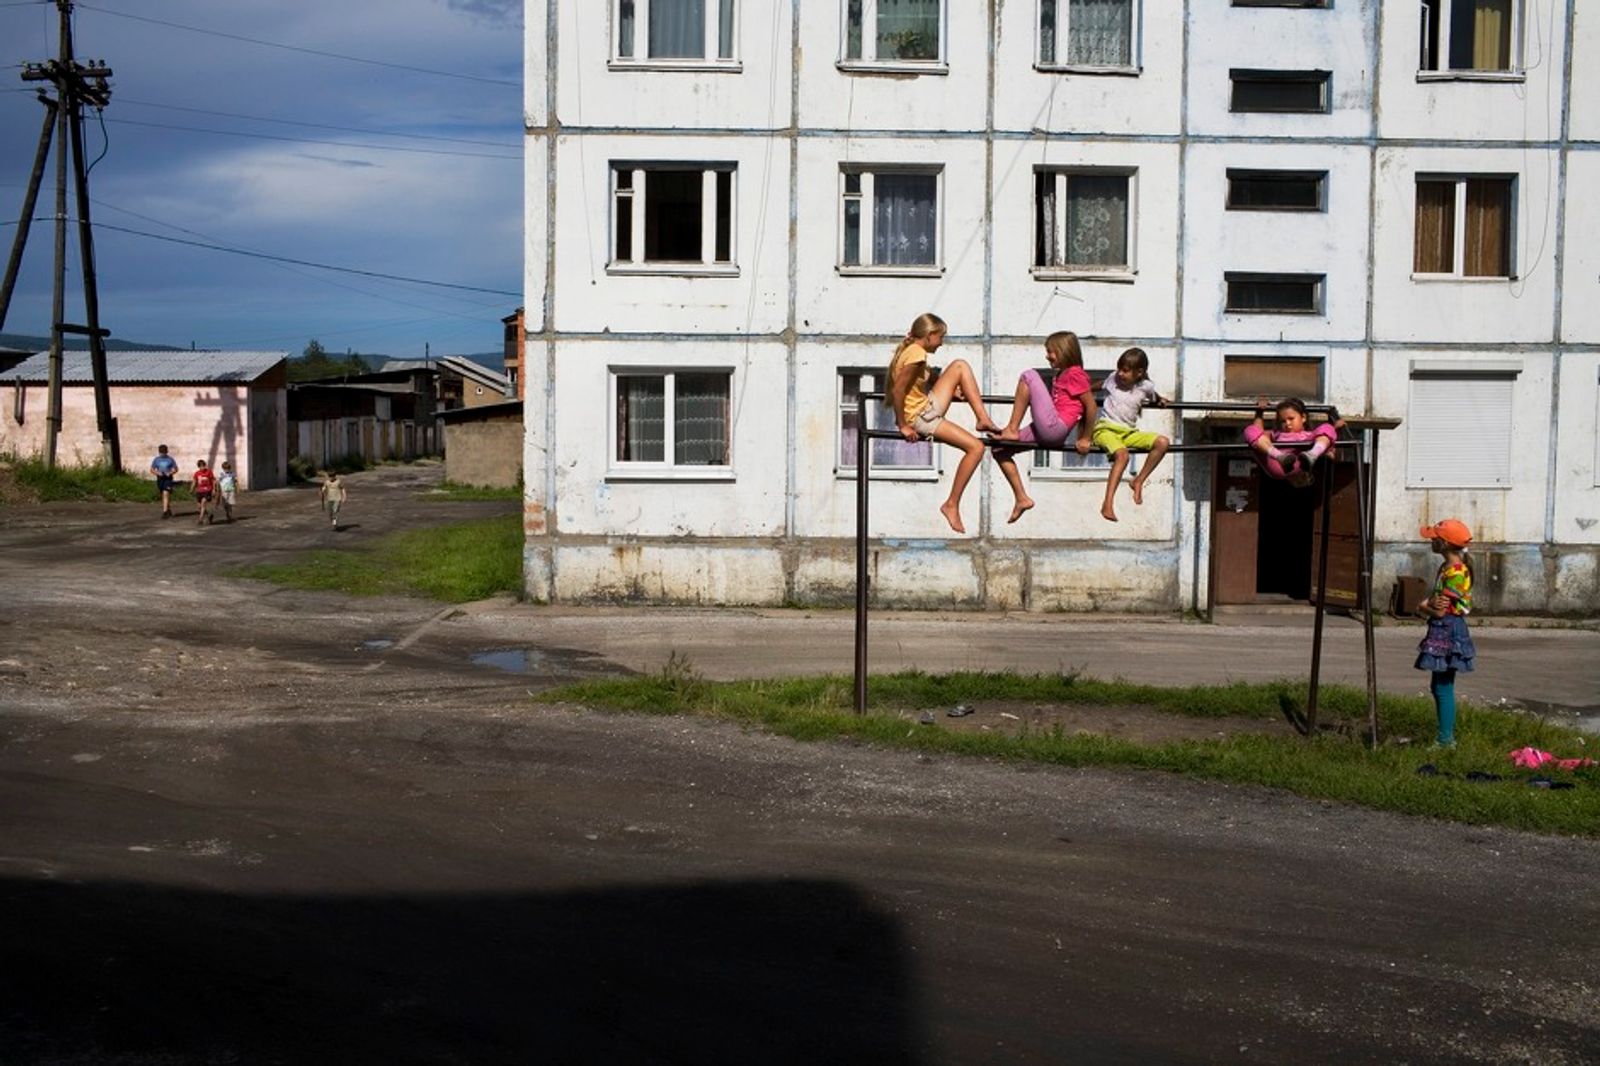 © Marco Pighin - Slyudyanka, Irkutsk Oblast, Russia. August 2010. Buildings where many people working in the paper mill live.